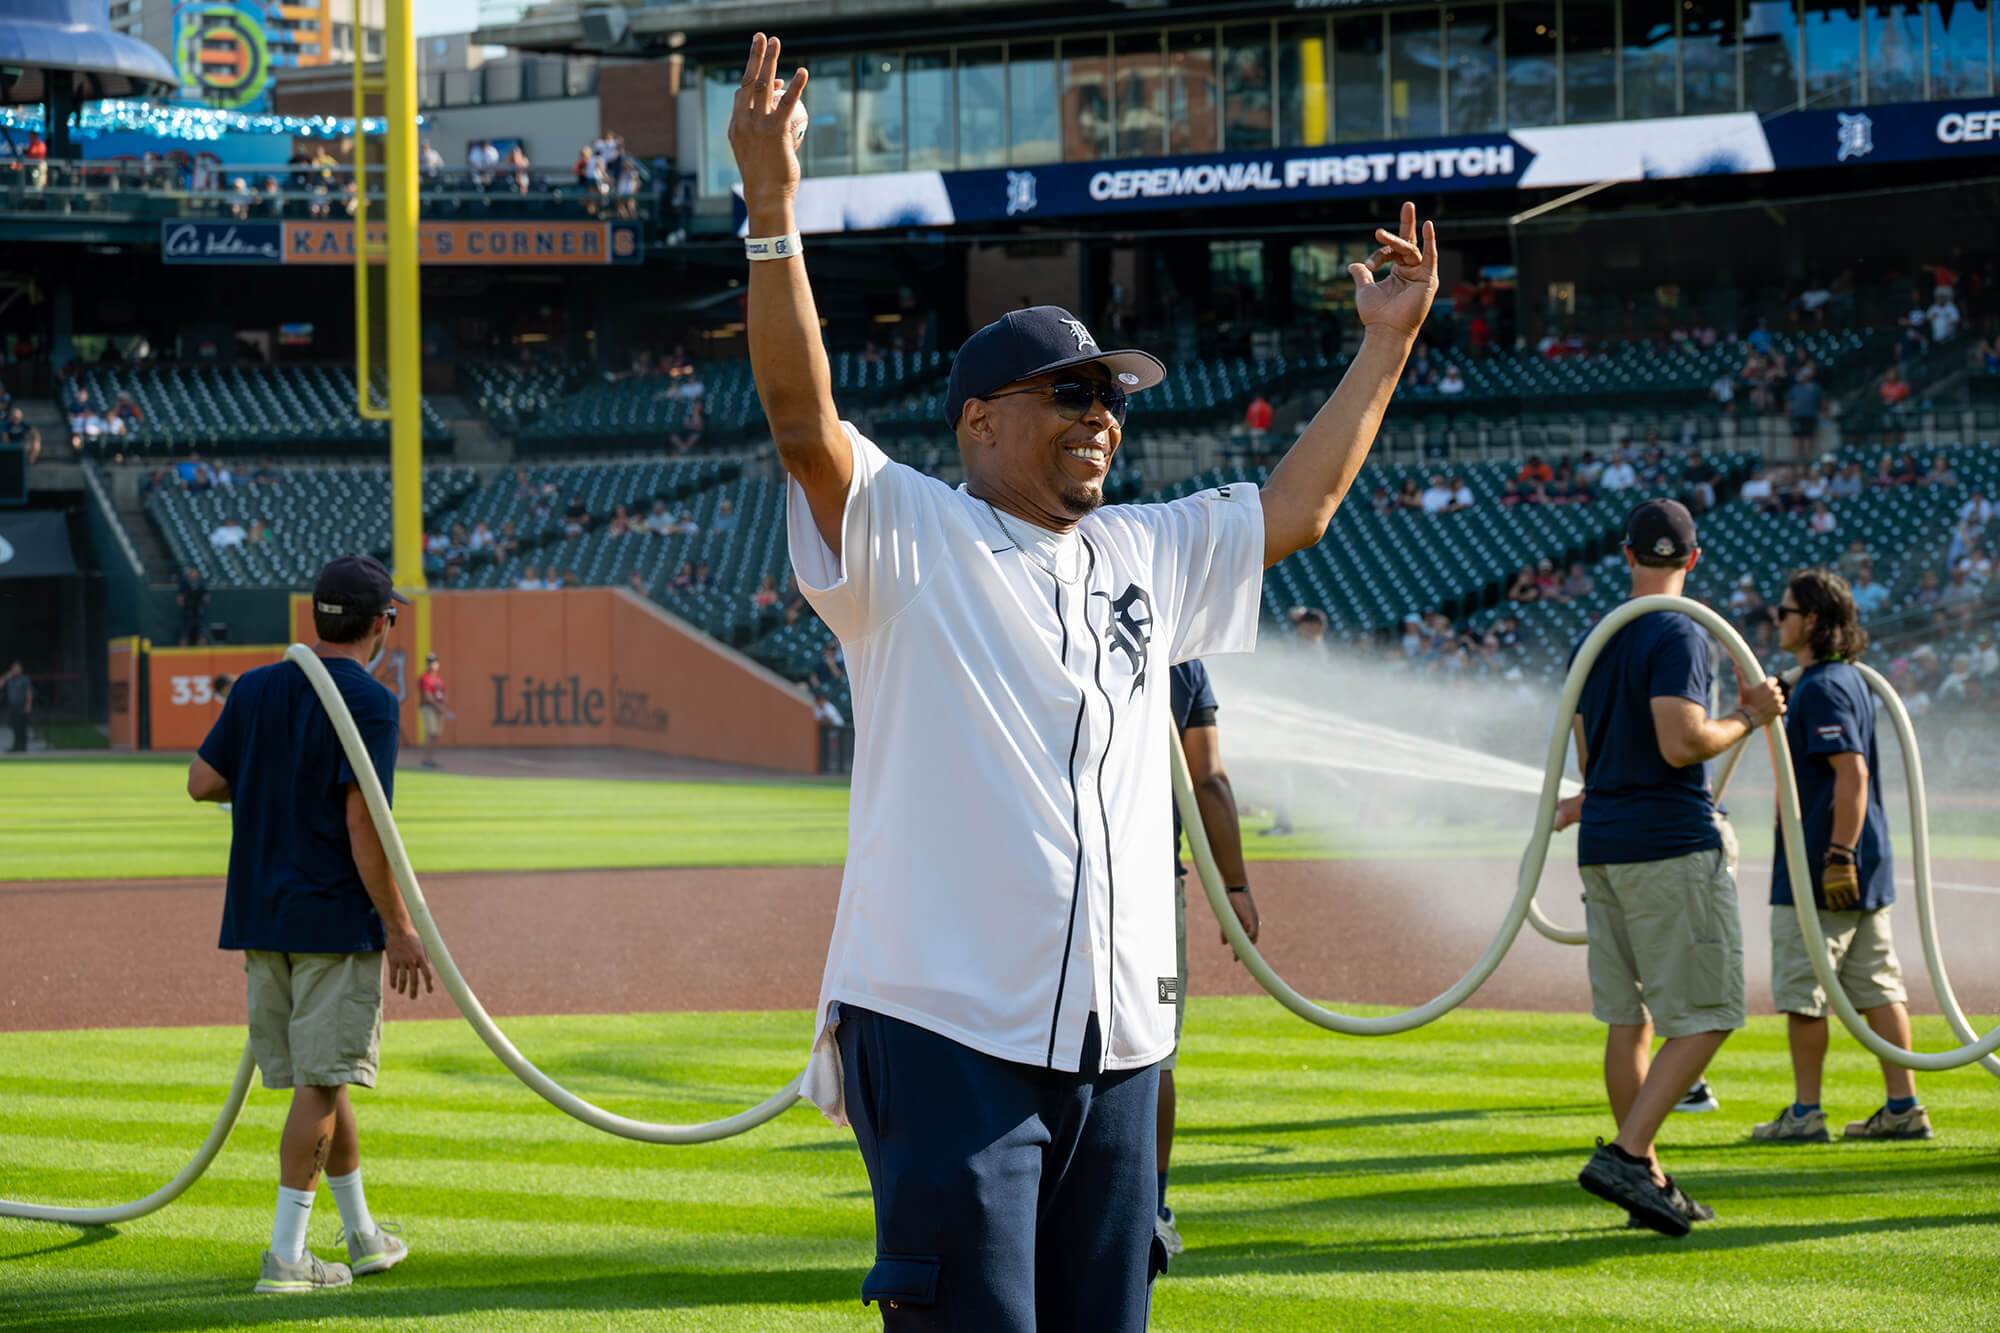 Robert Hopkins threw out the ceremonial first pitch at the Prostate Cancer Awareness Night game with the Detroit Tigers.